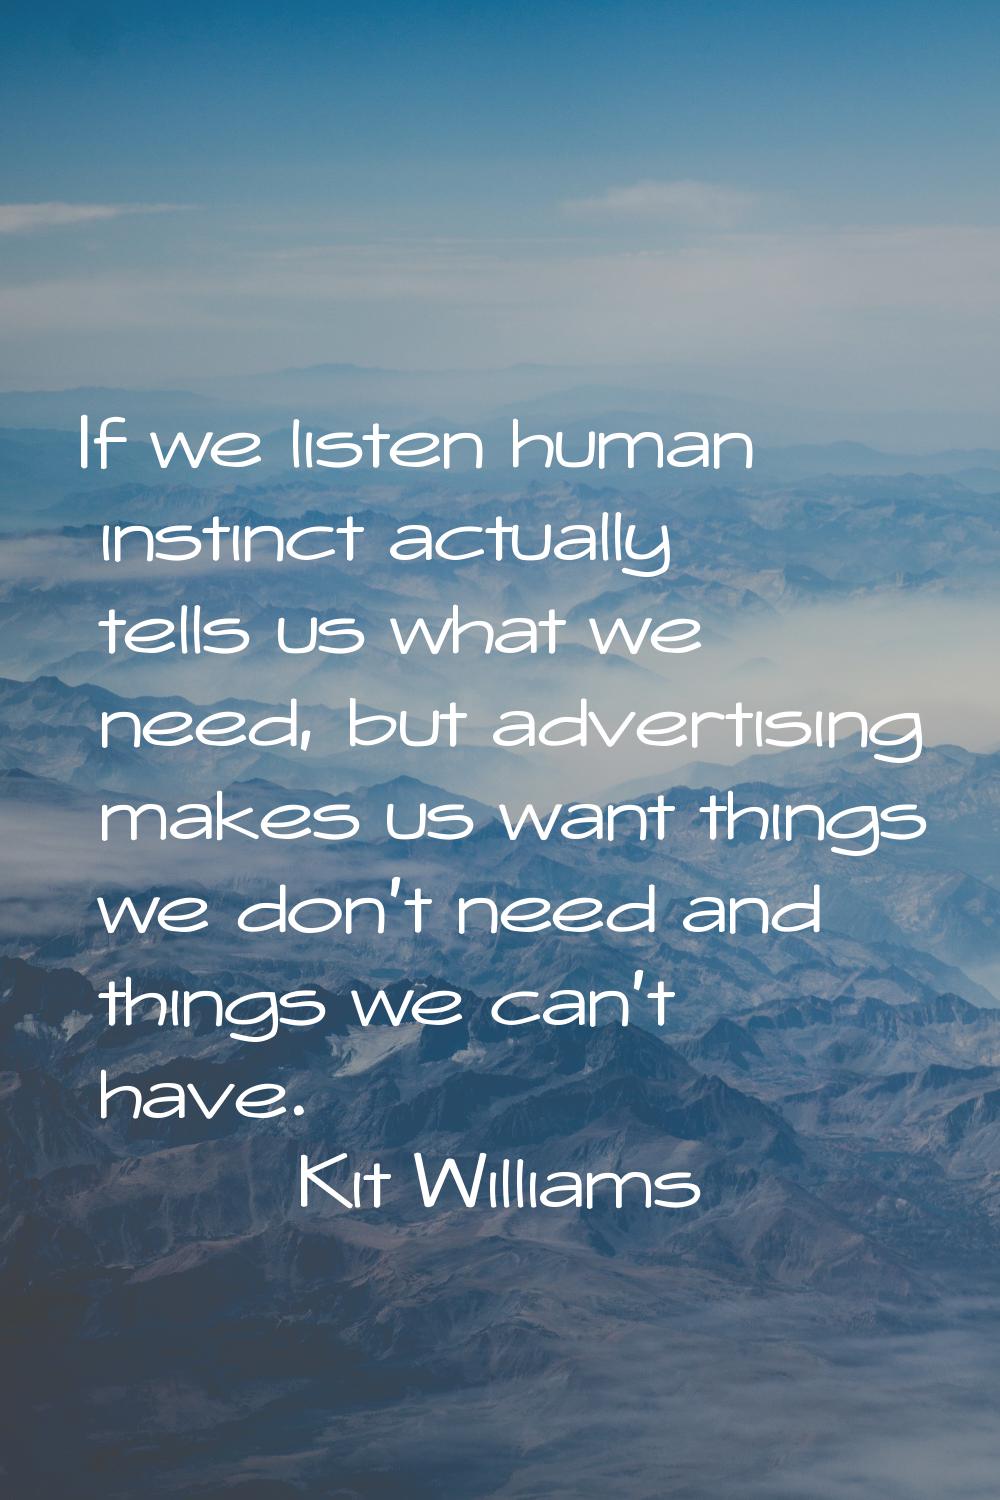 If we listen human instinct actually tells us what we need, but advertising makes us want things we